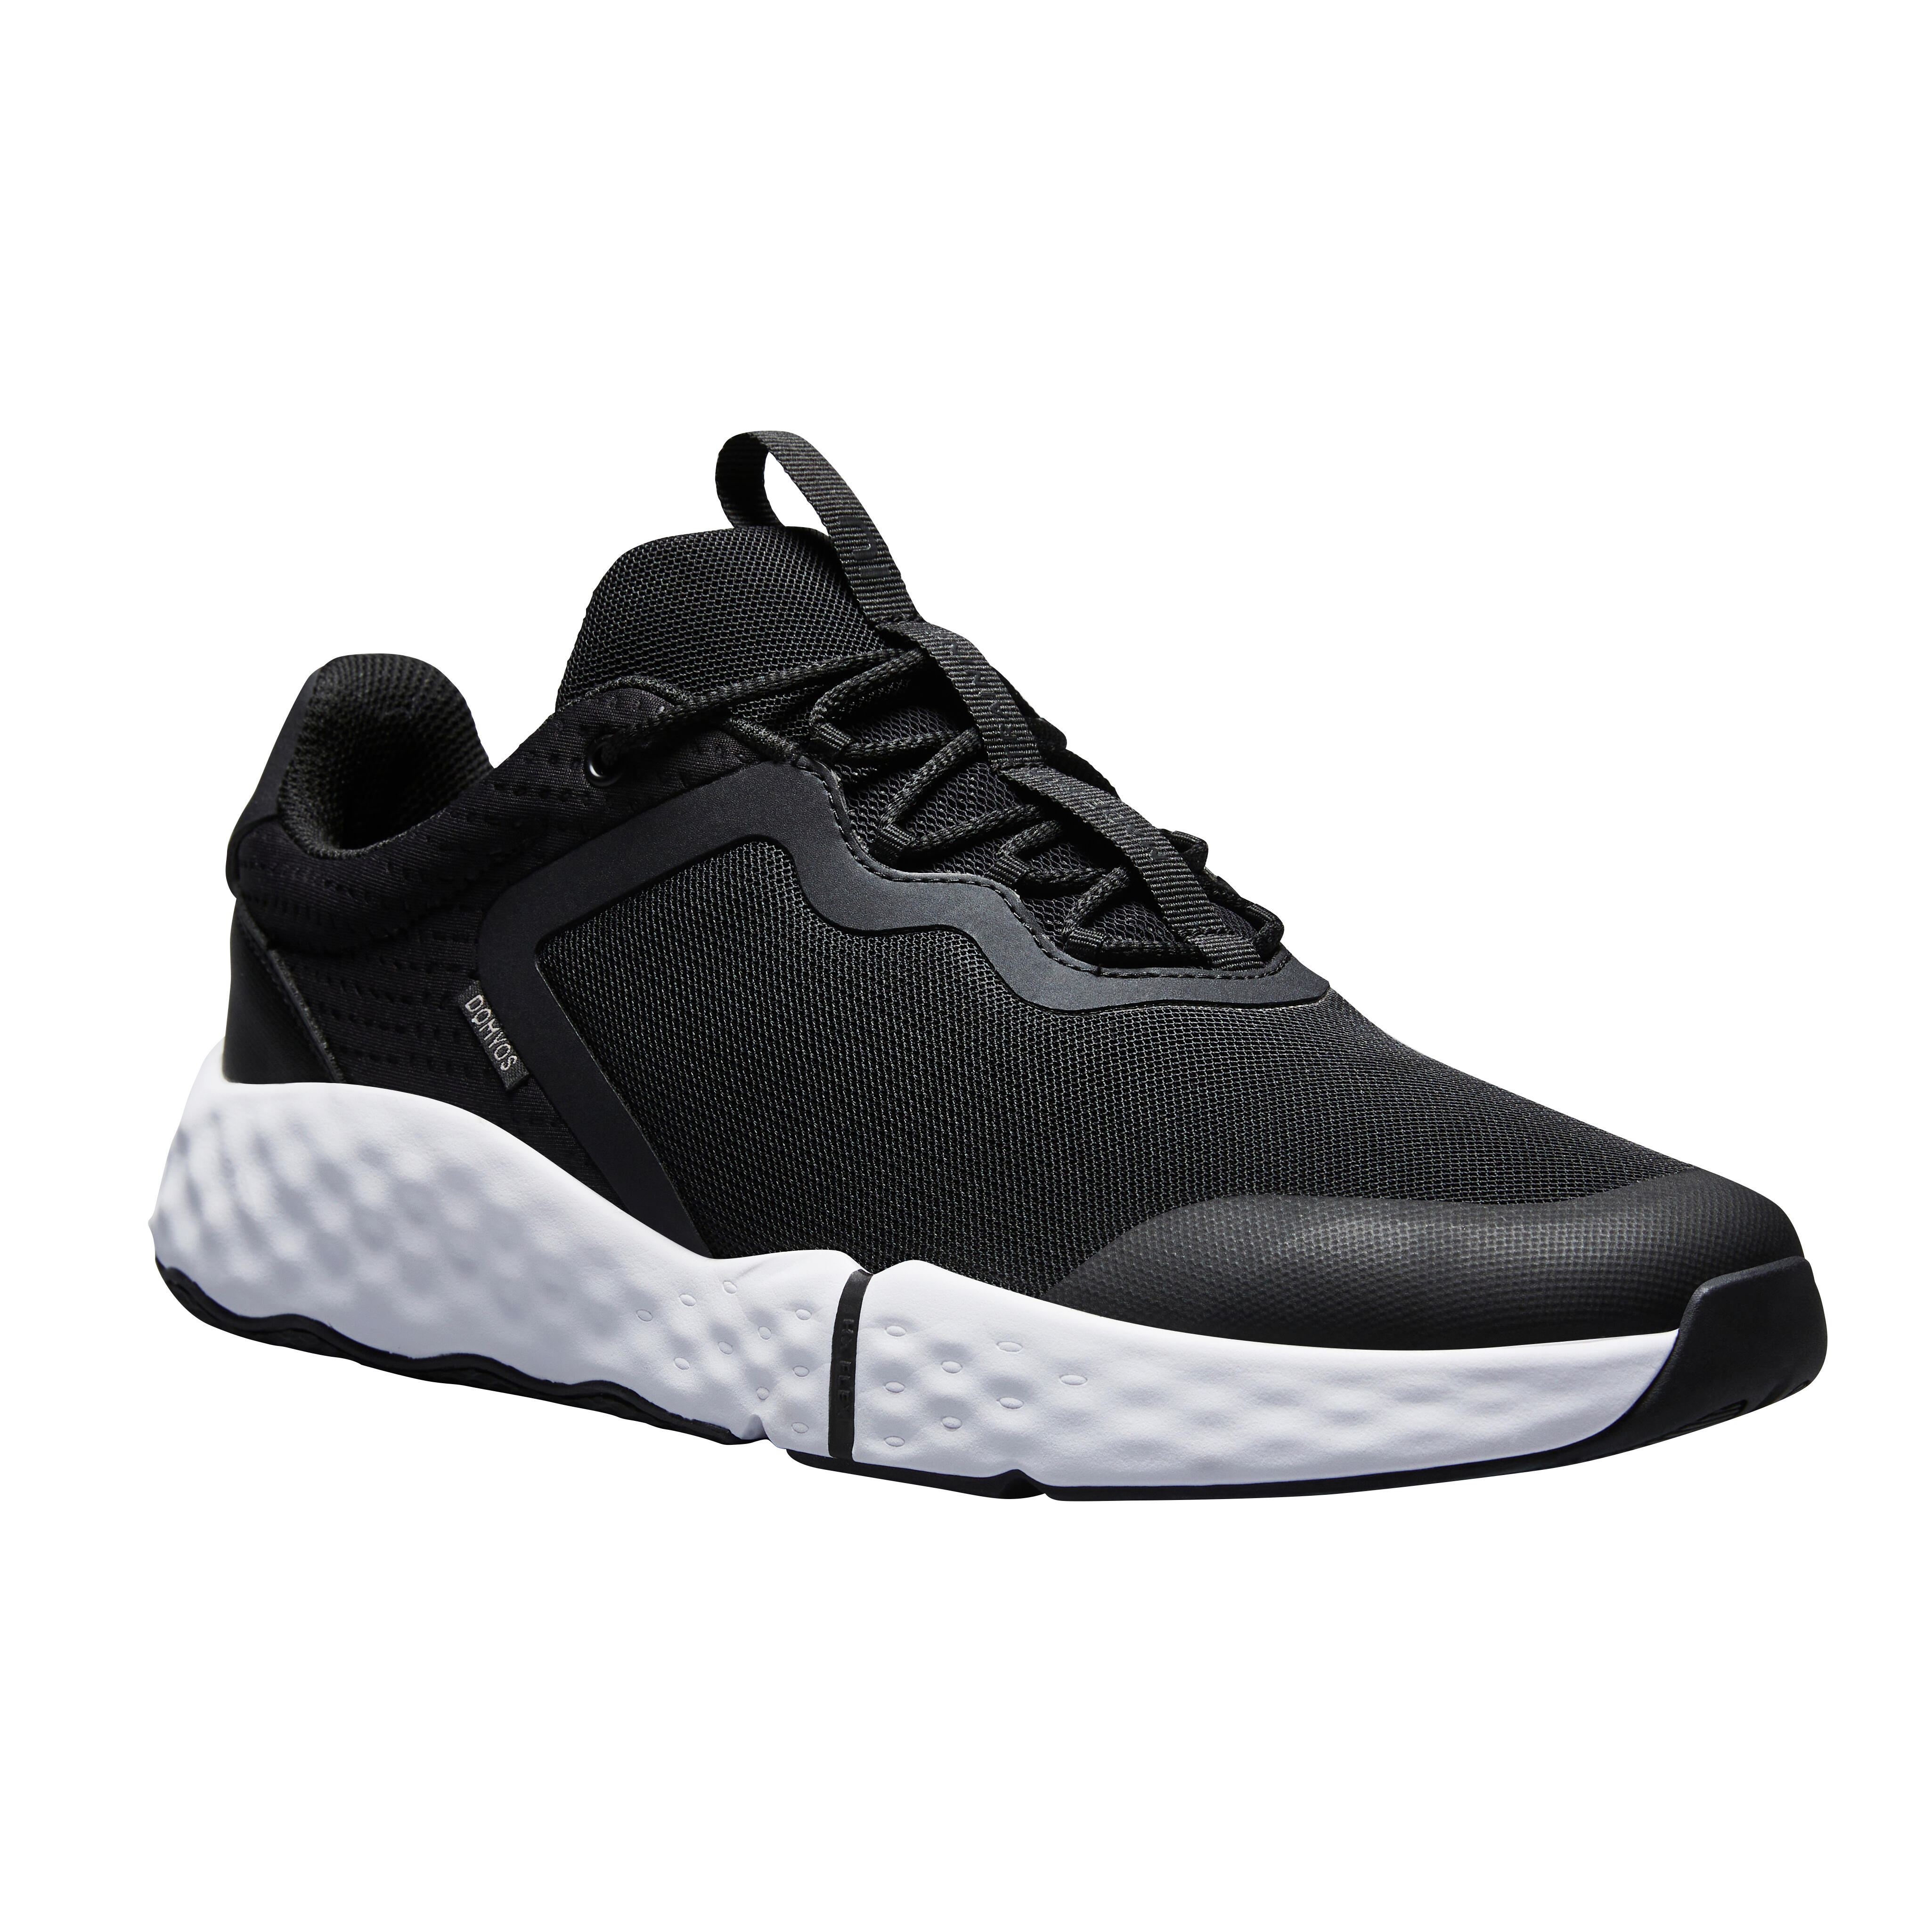 chaussures de fitness 520 homme - domyos